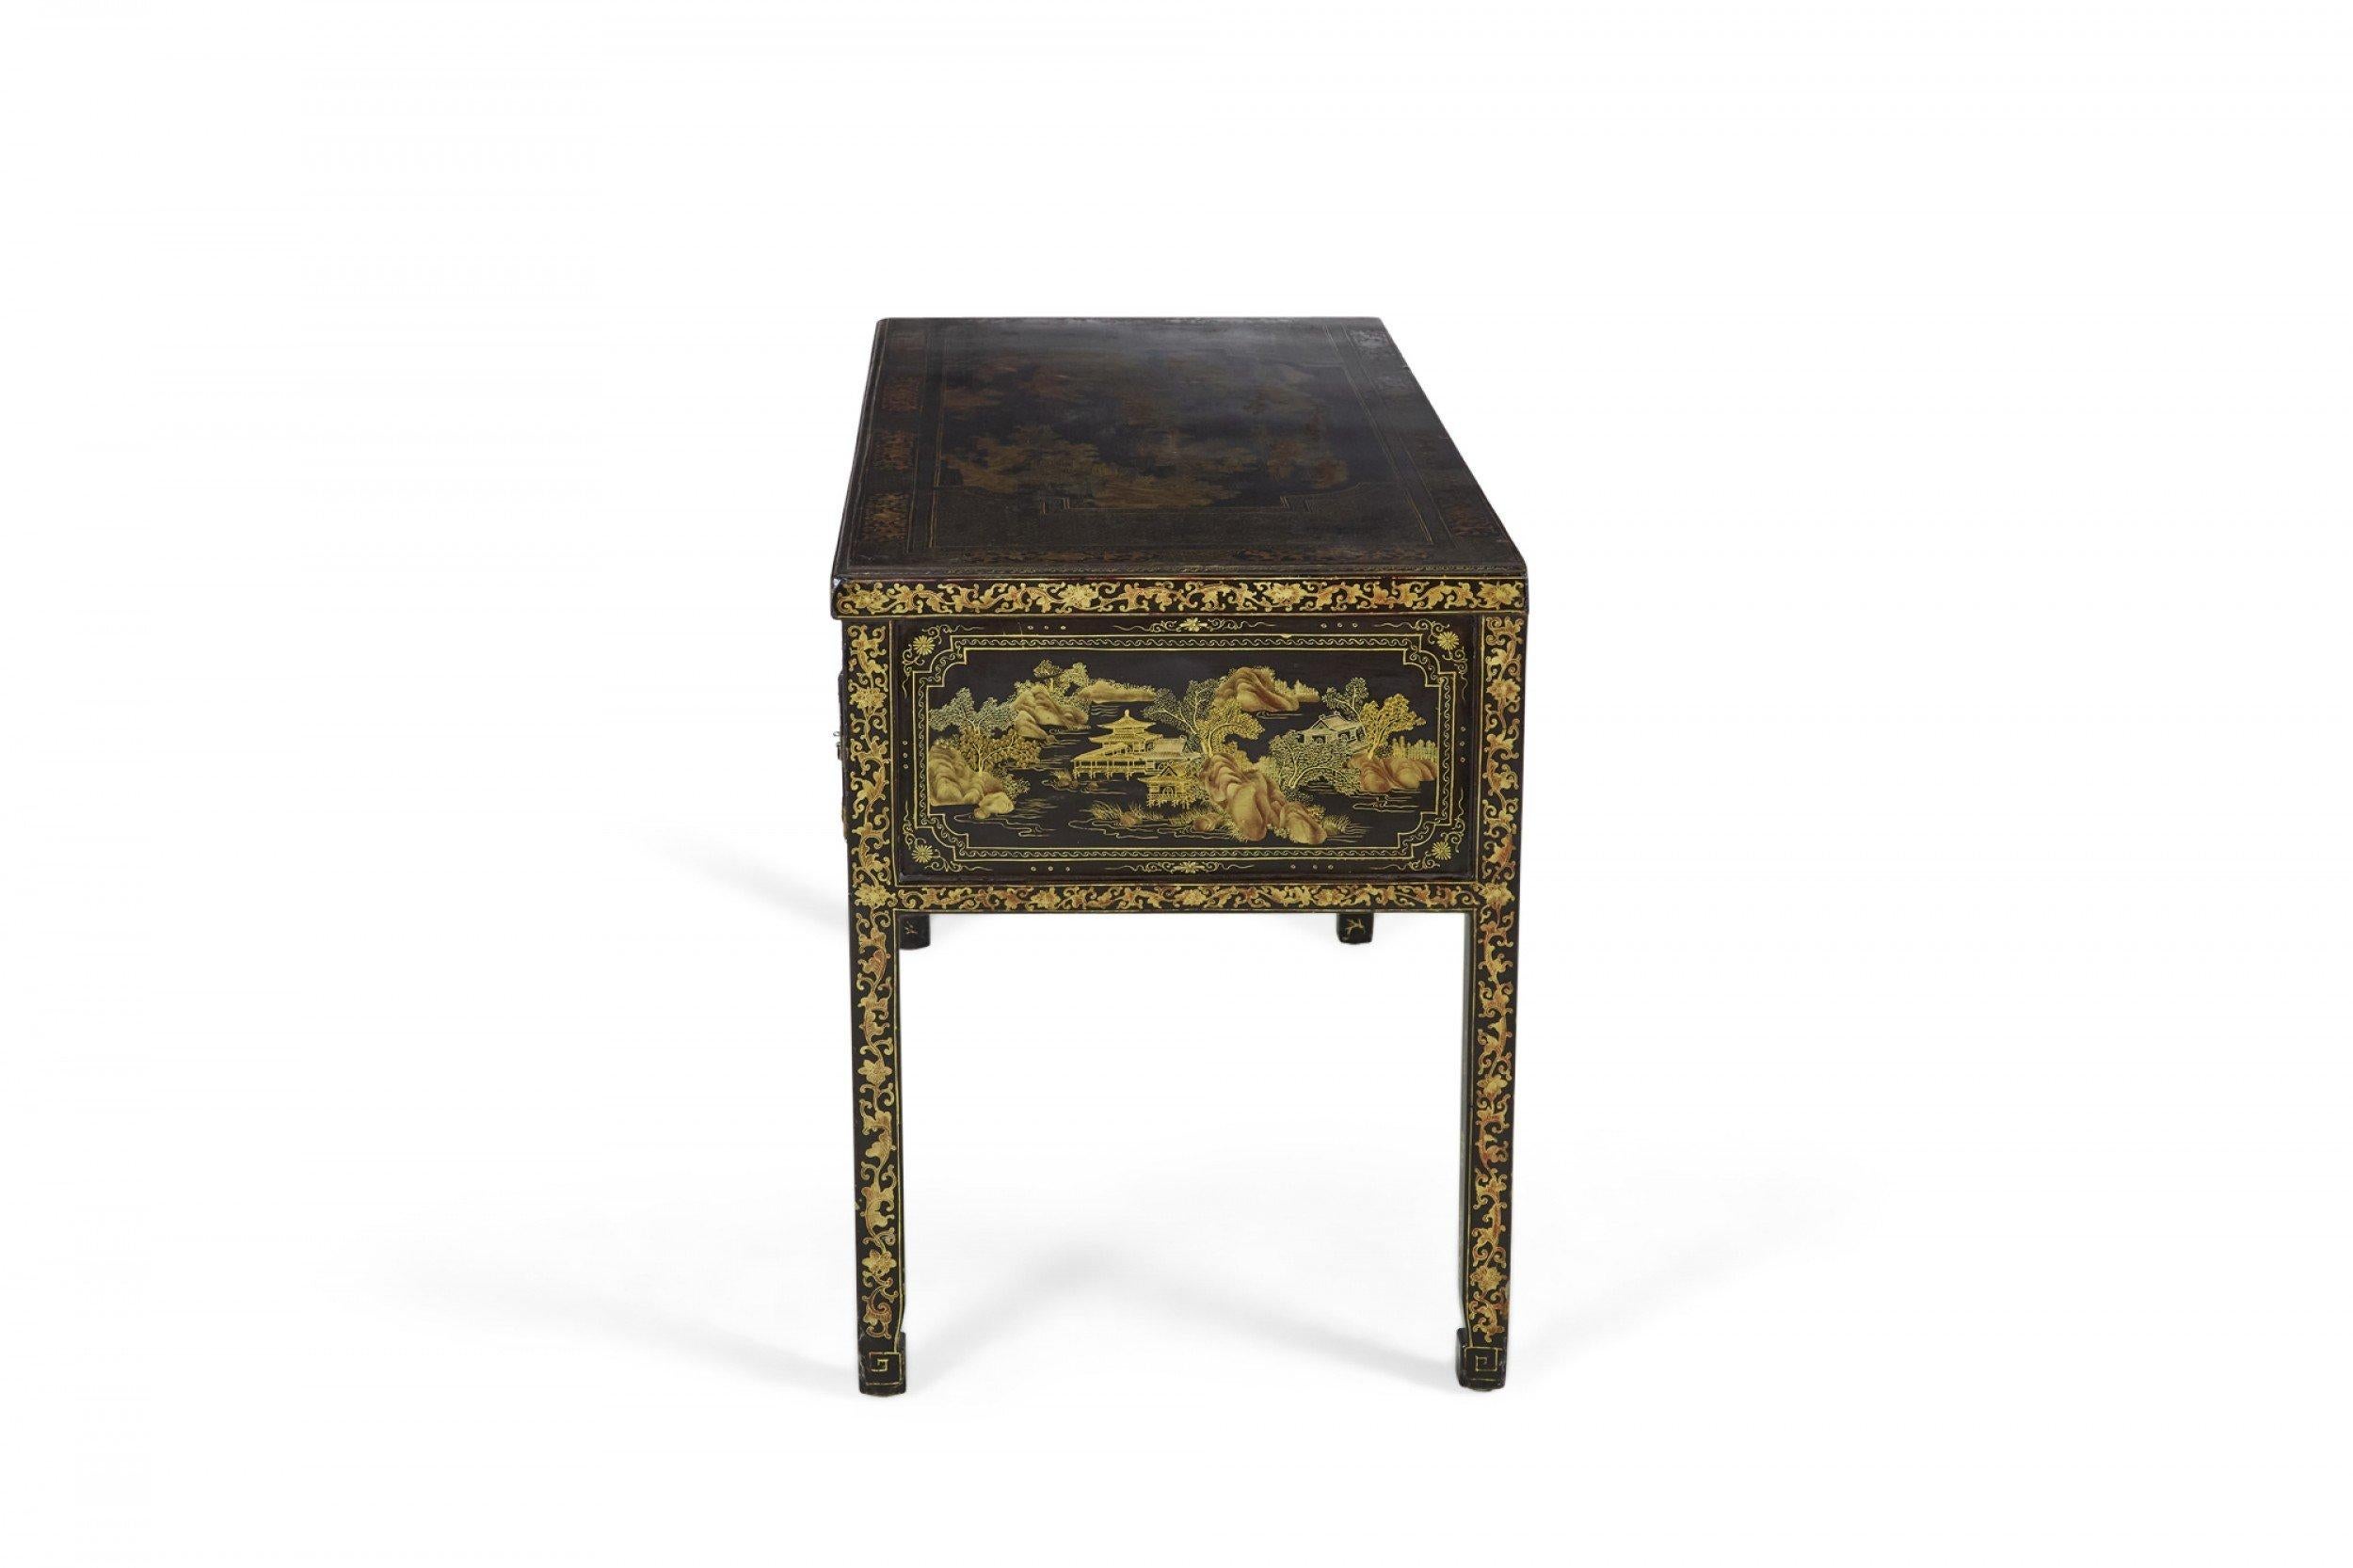 19th Century English Regency Chinese Export Gilt Black Lacquer Desk In Good Condition For Sale In New York, NY